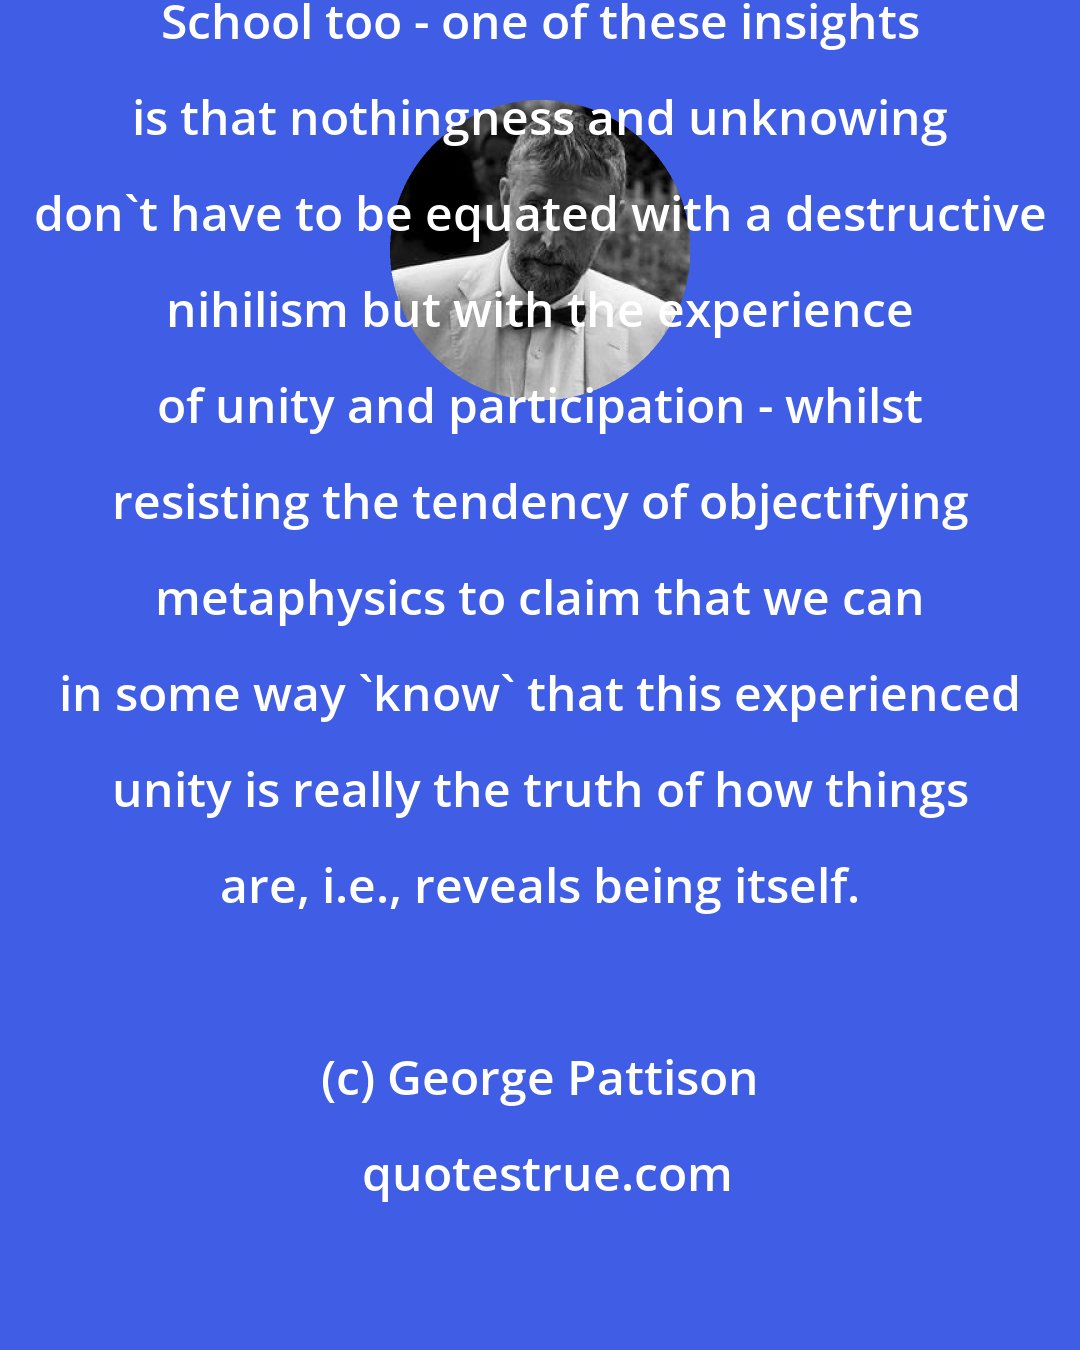 George Pattison: Perhaps - and this goes for the Kyoto School too - one of these insights is that nothingness and unknowing don't have to be equated with a destructive nihilism but with the experience of unity and participation - whilst resisting the tendency of objectifying metaphysics to claim that we can in some way 'know' that this experienced unity is really the truth of how things are, i.e., reveals being itself.